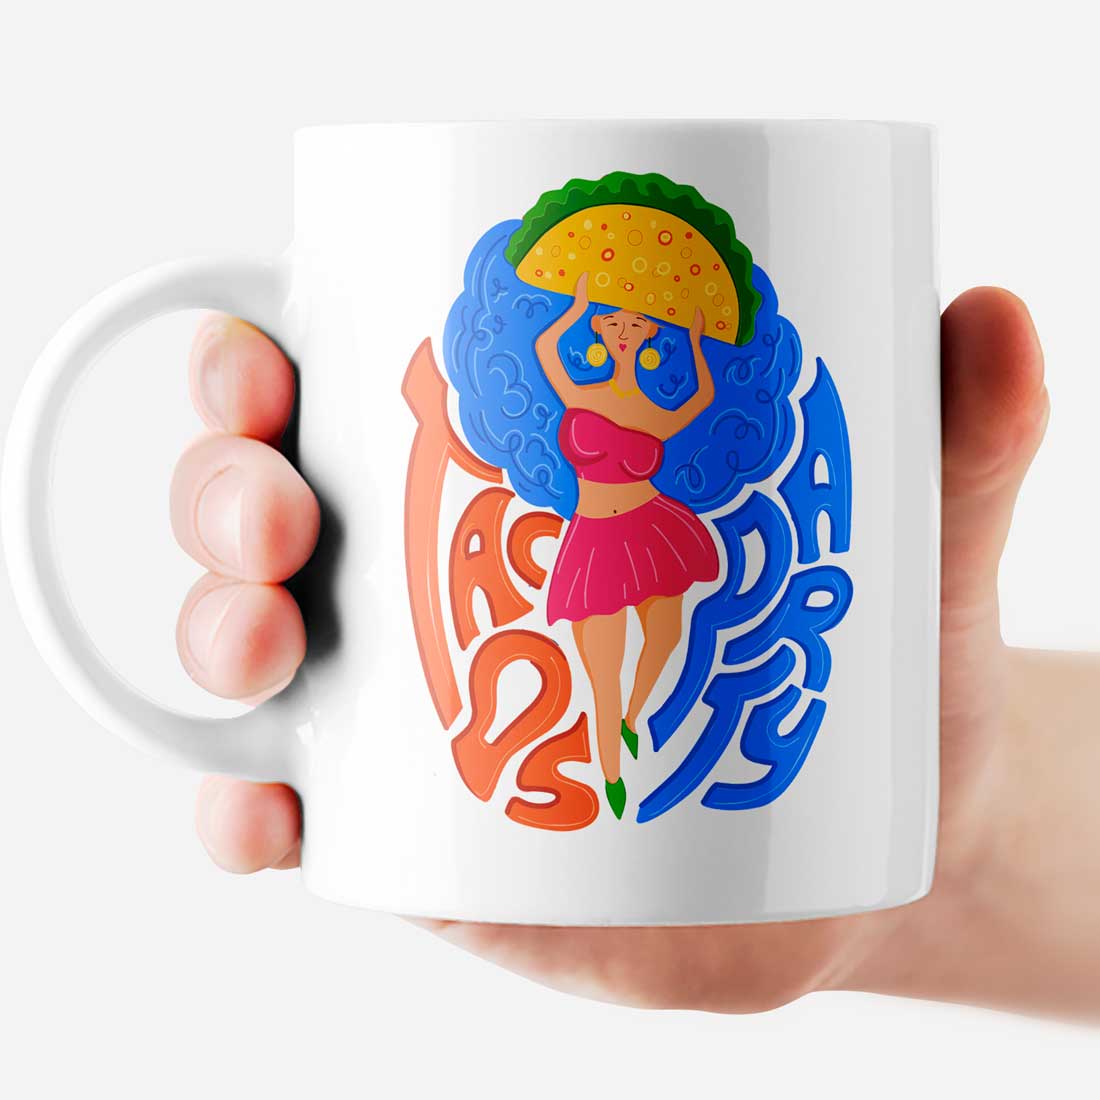 White tea cup with the colorful Mexican woman.